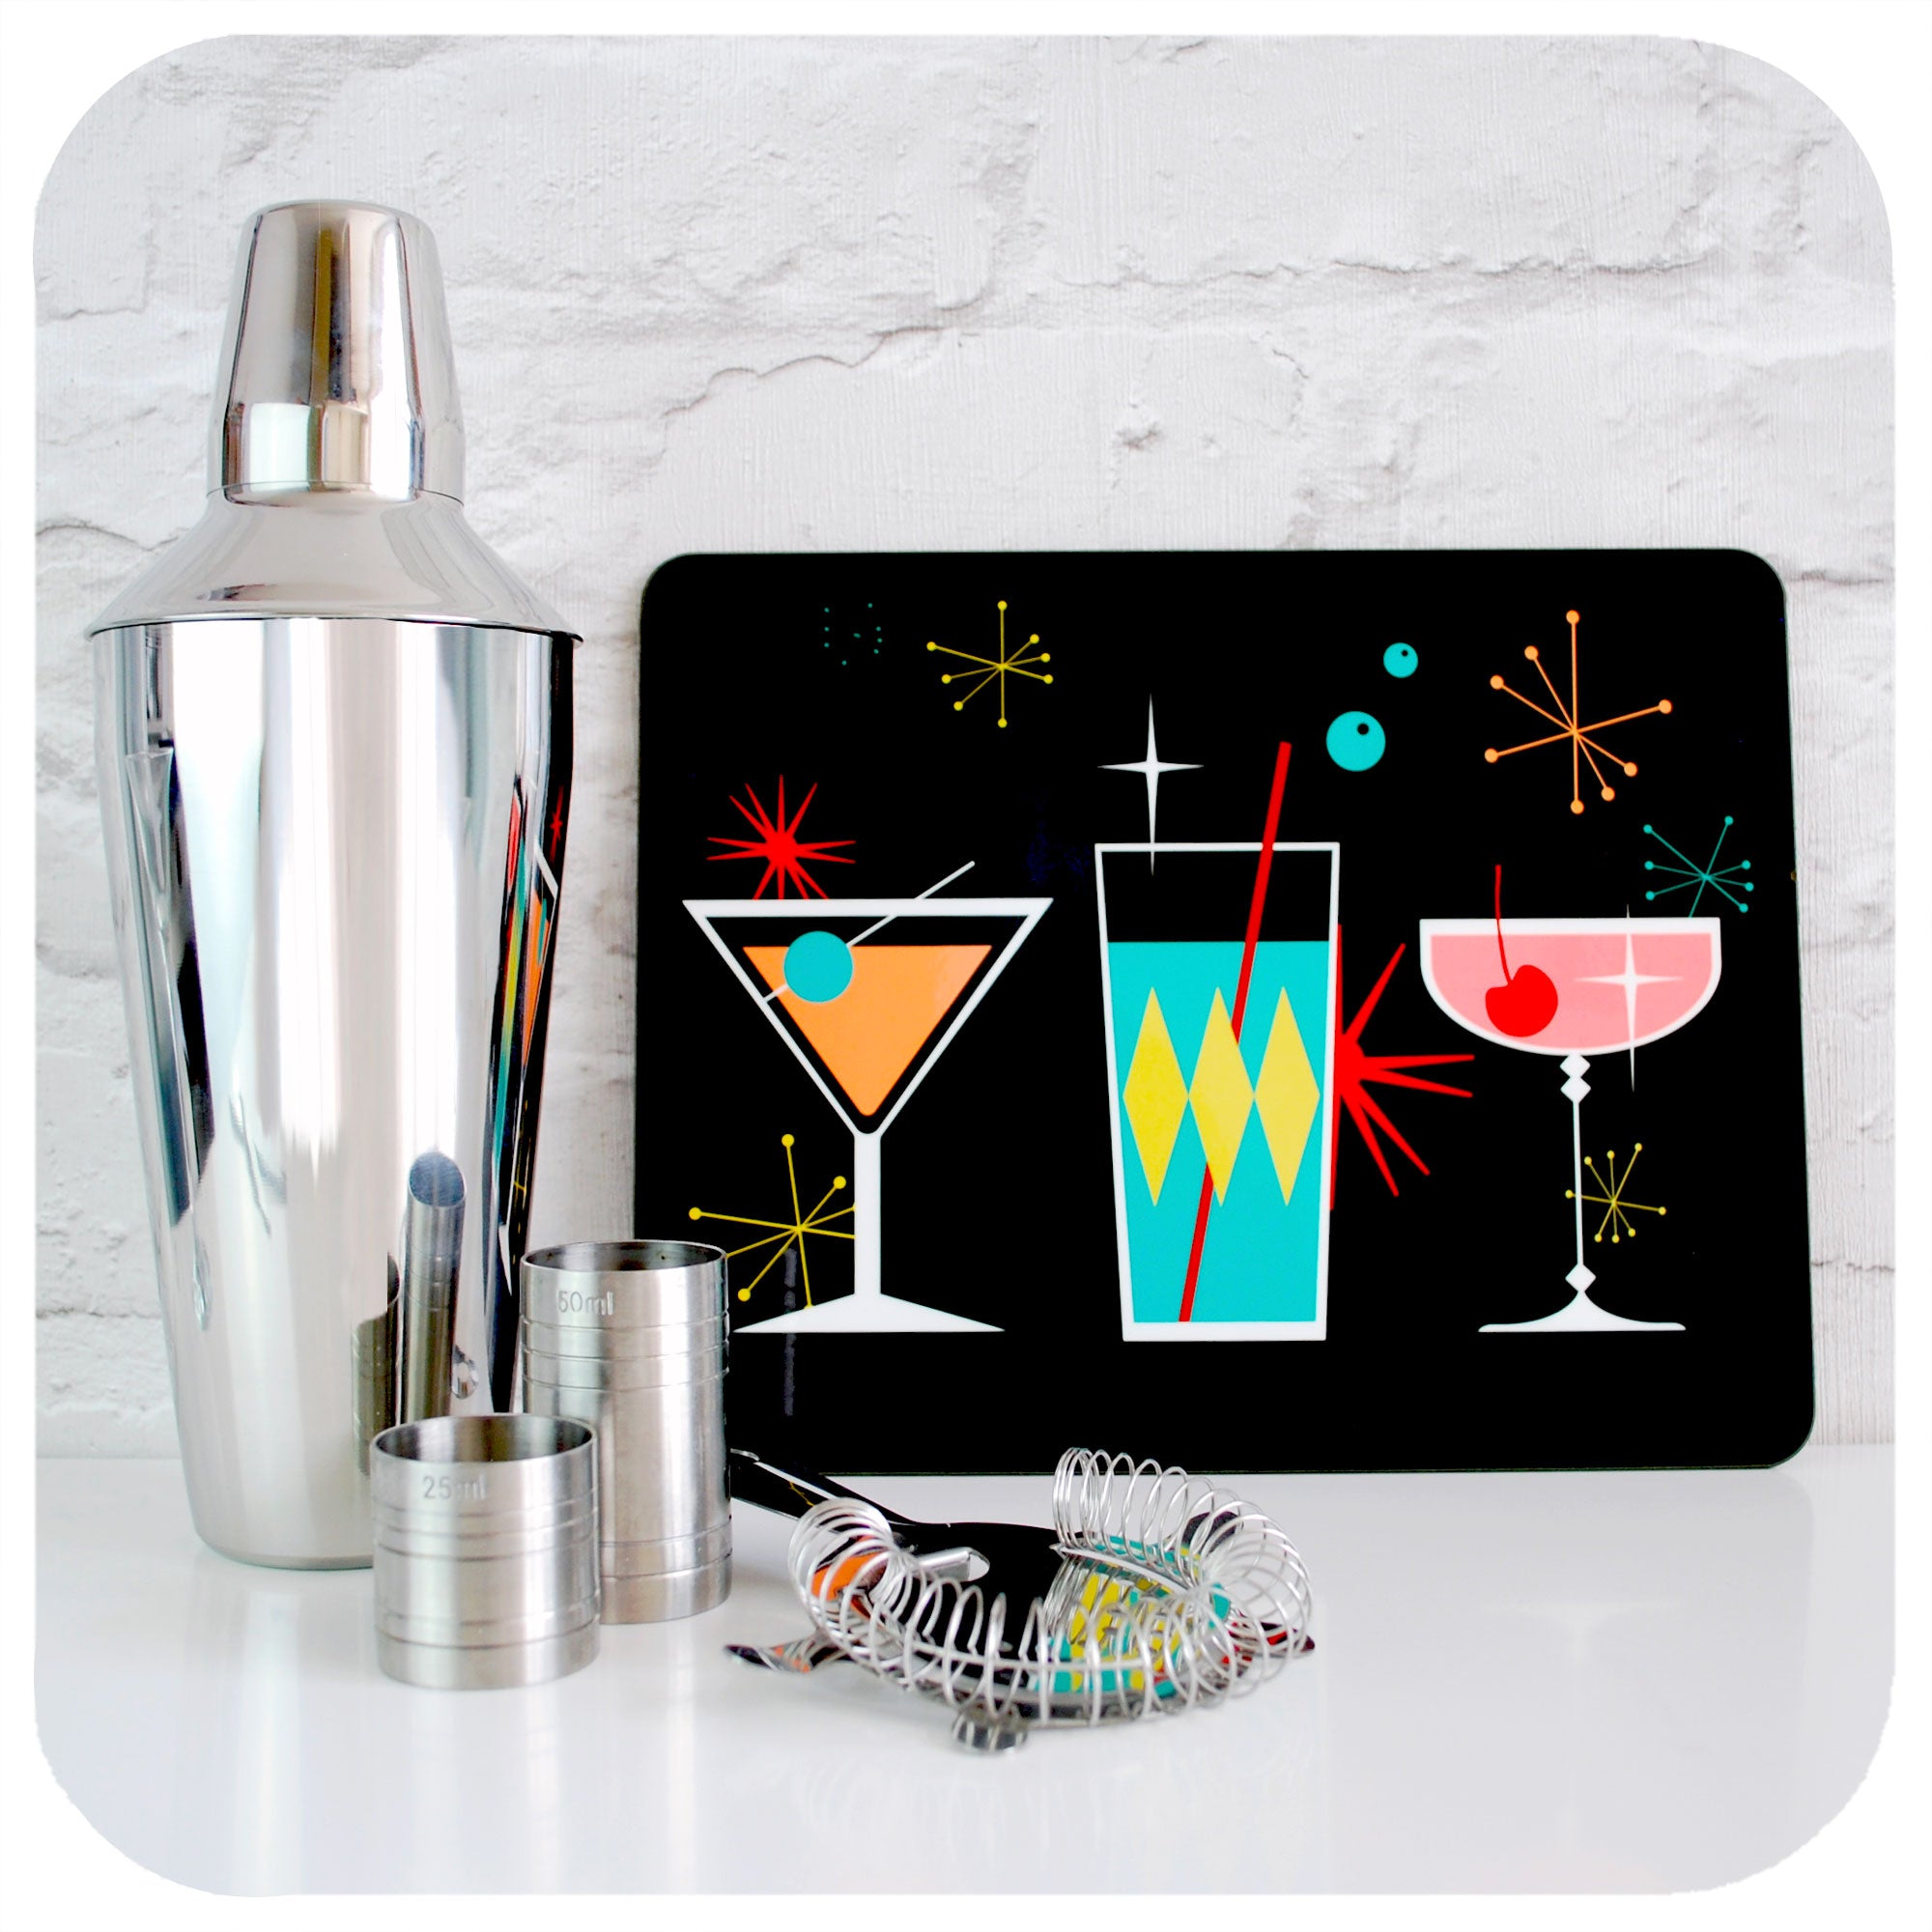 Cosmic Cocktail Placemat with retro cocktail accessories | The Inkabilly Emporium